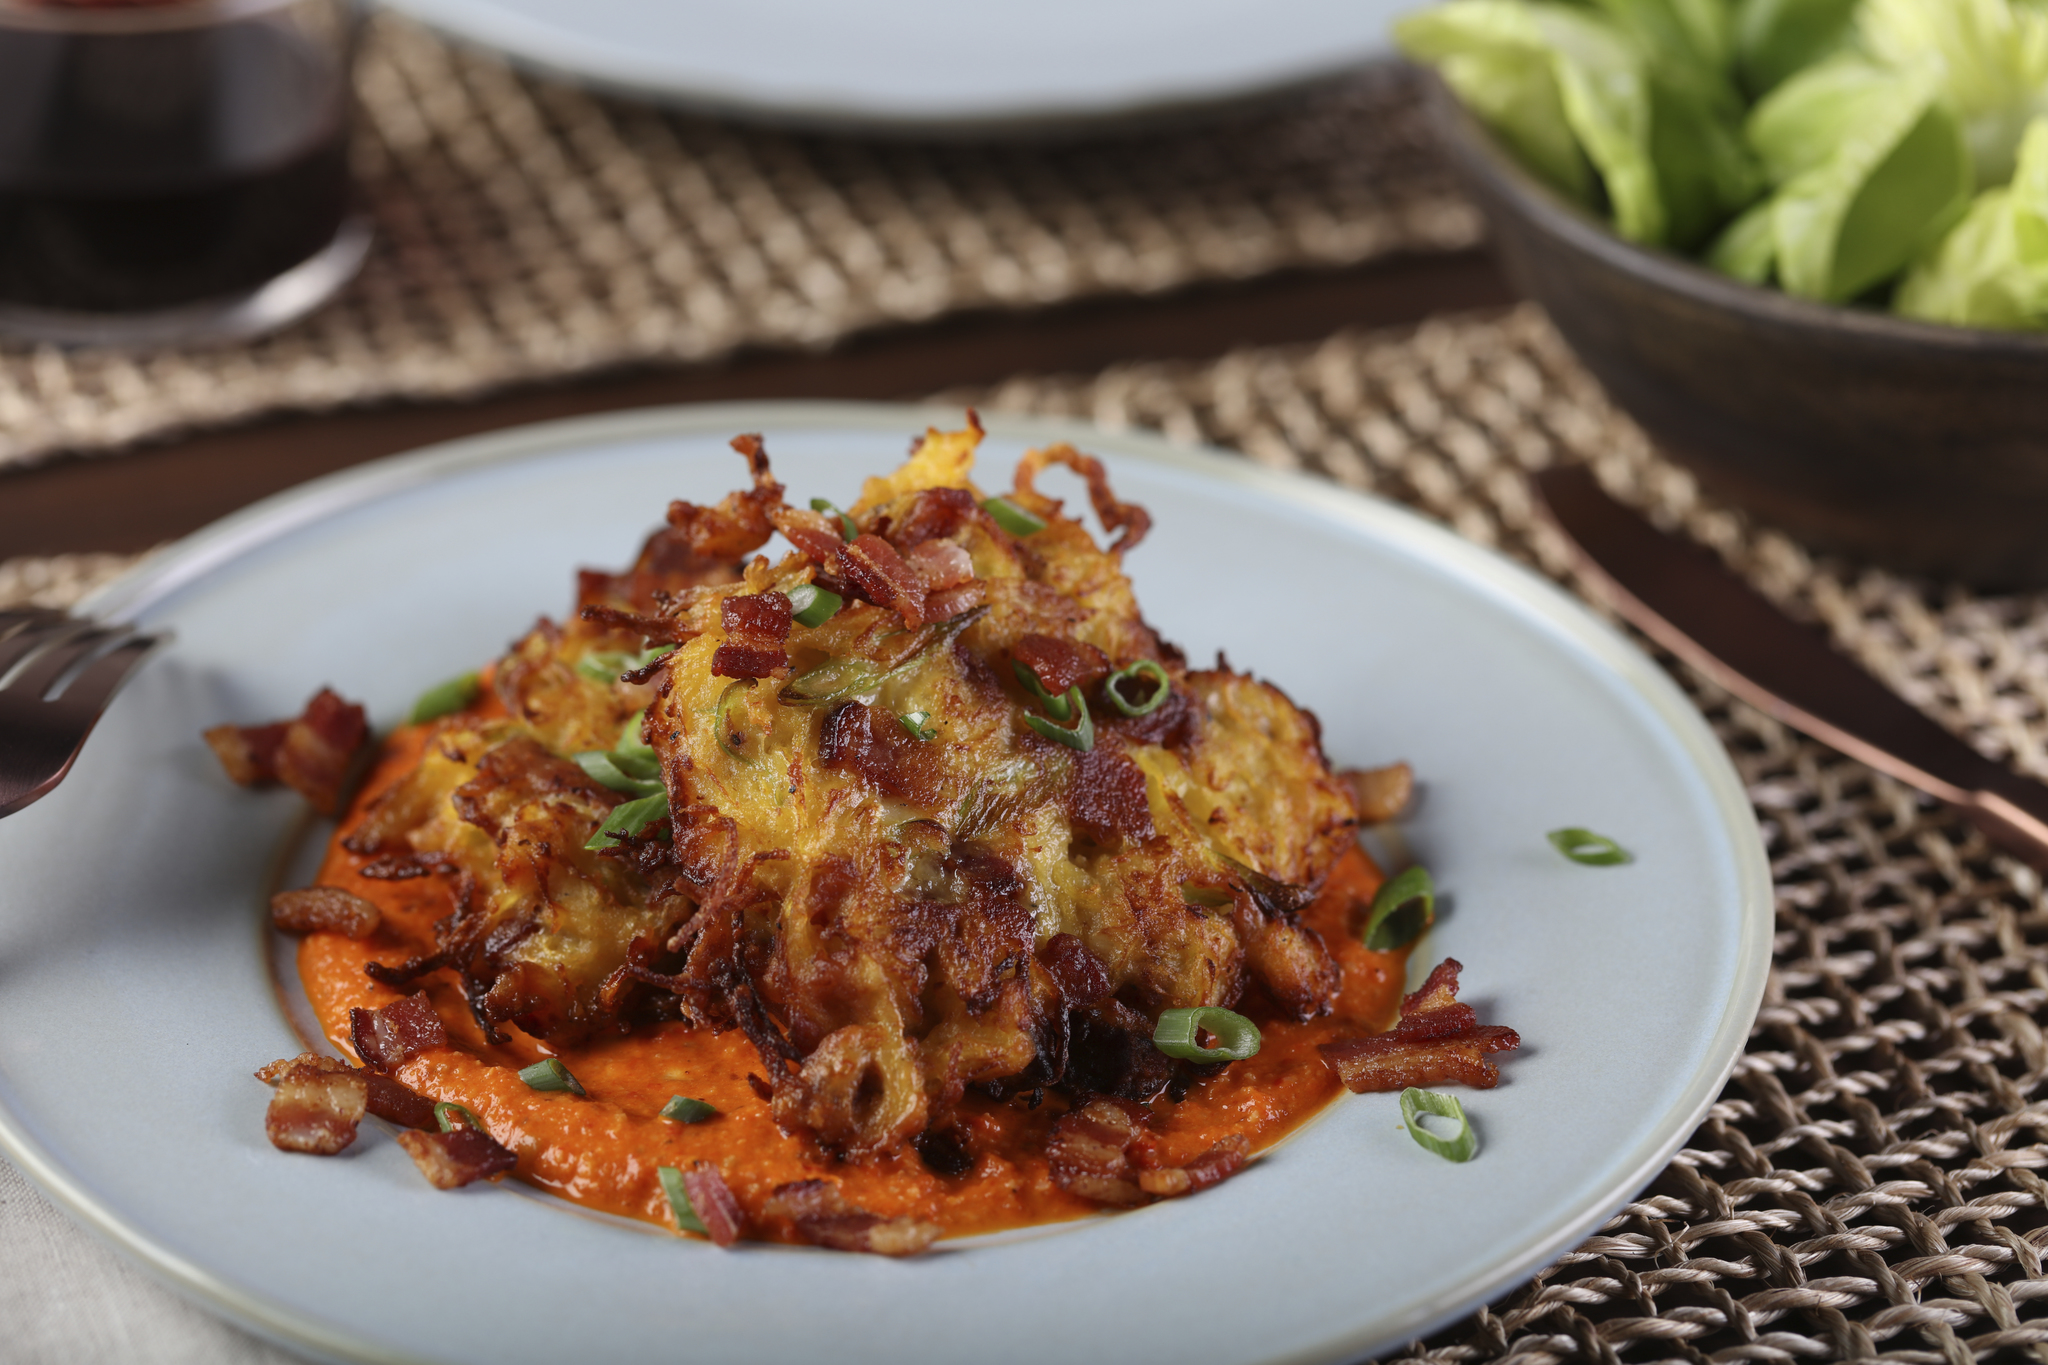 Bacon and Spaghetti Squash Fritters with Roasted Red Pepper Sauce